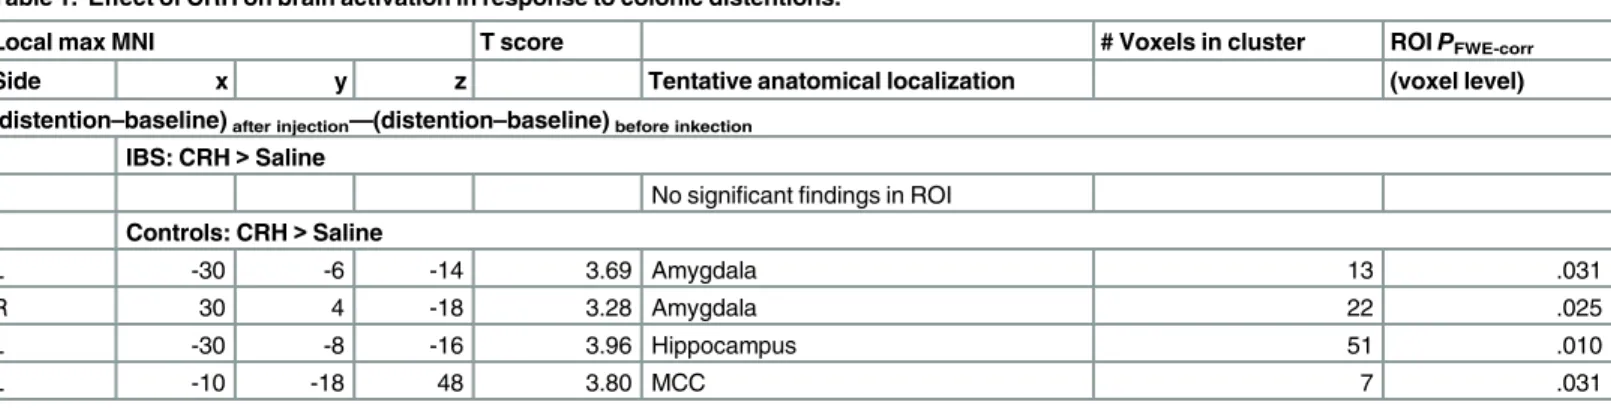 Table 1. Effect of CRH on brain activation in response to colonic distentions.